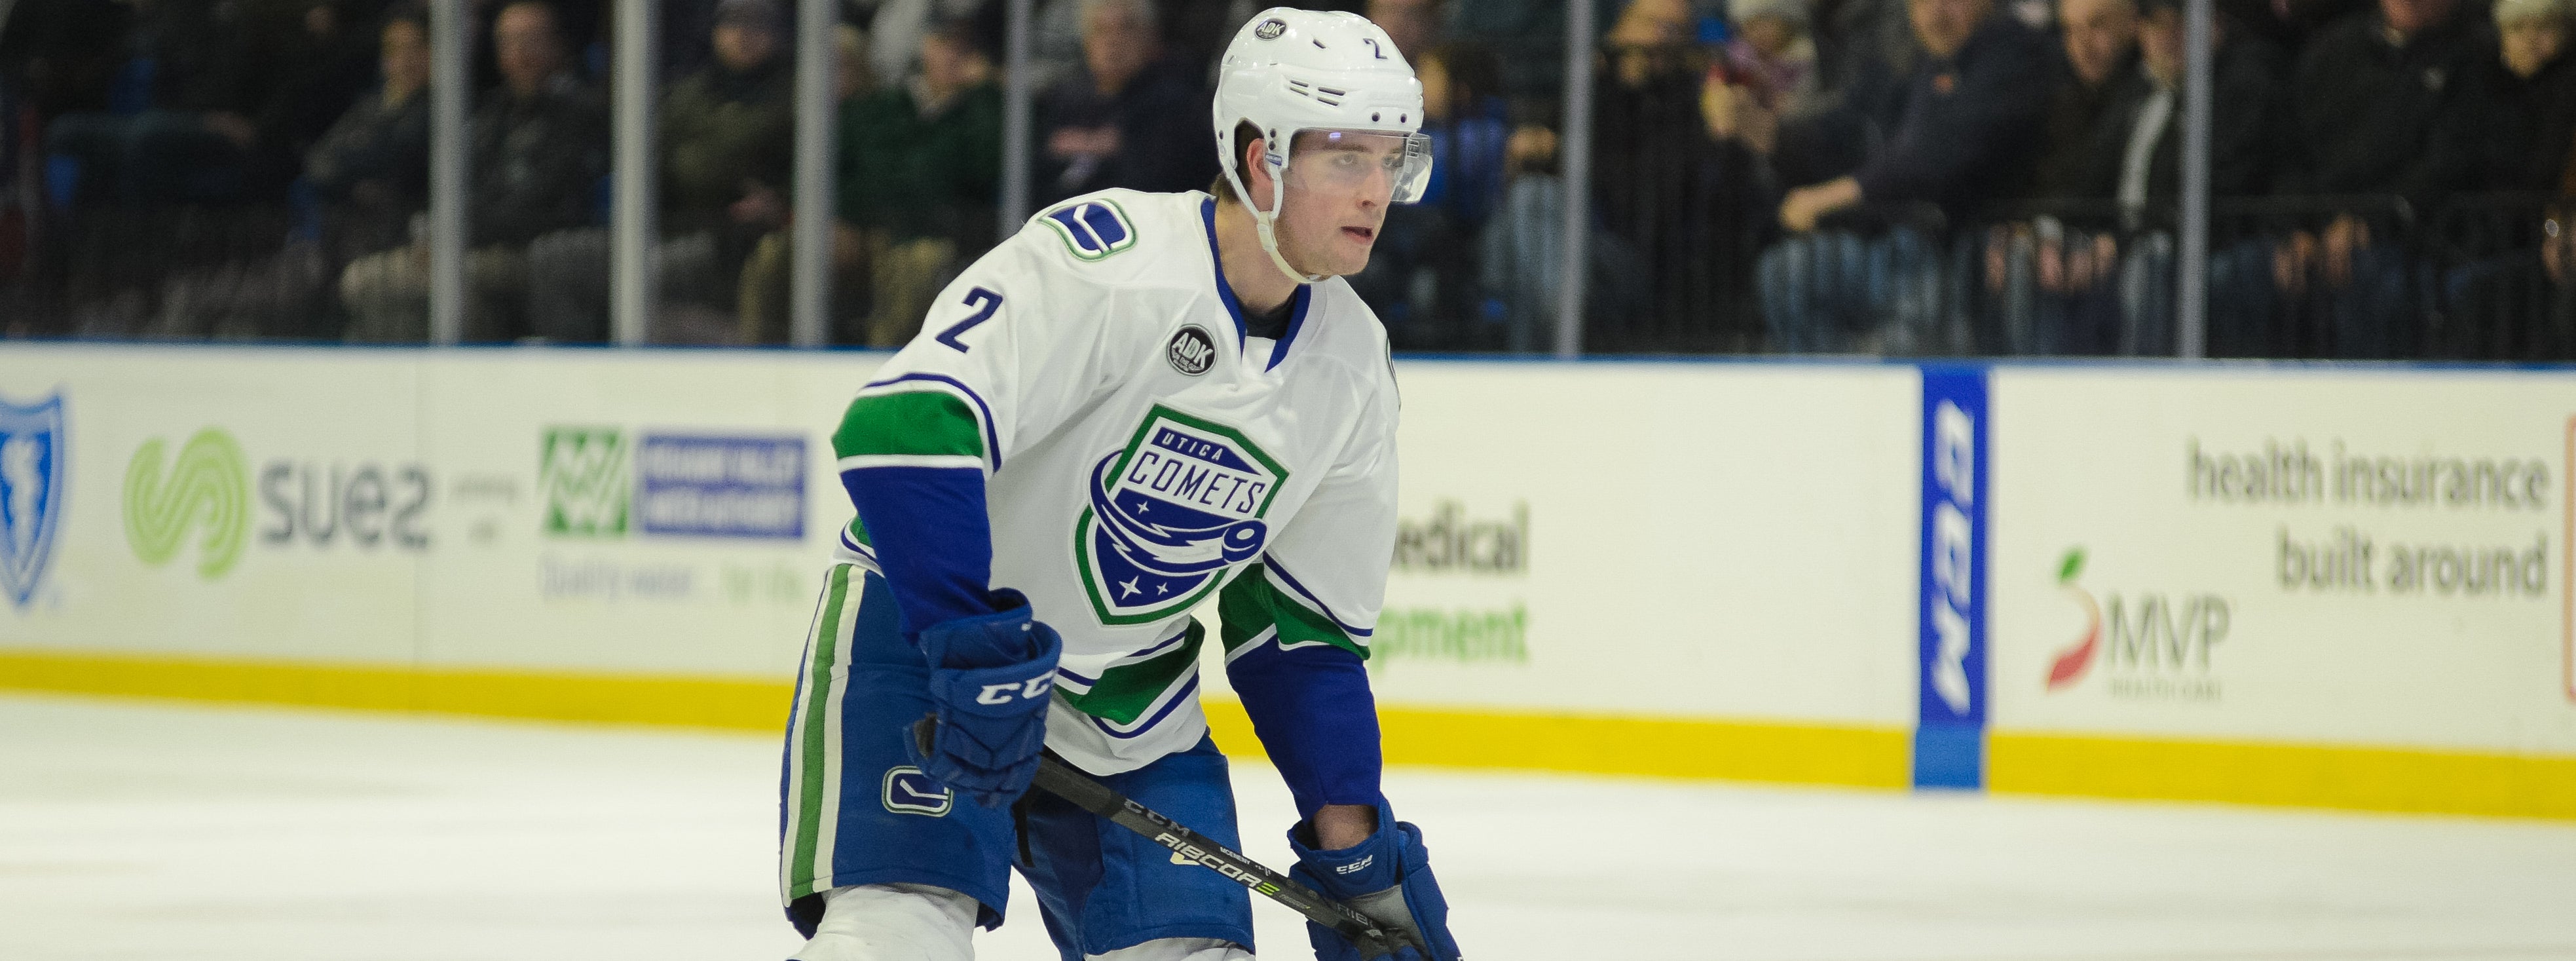 COMETS HOST BRUINS FOR FIRST TIME THIS SEASON